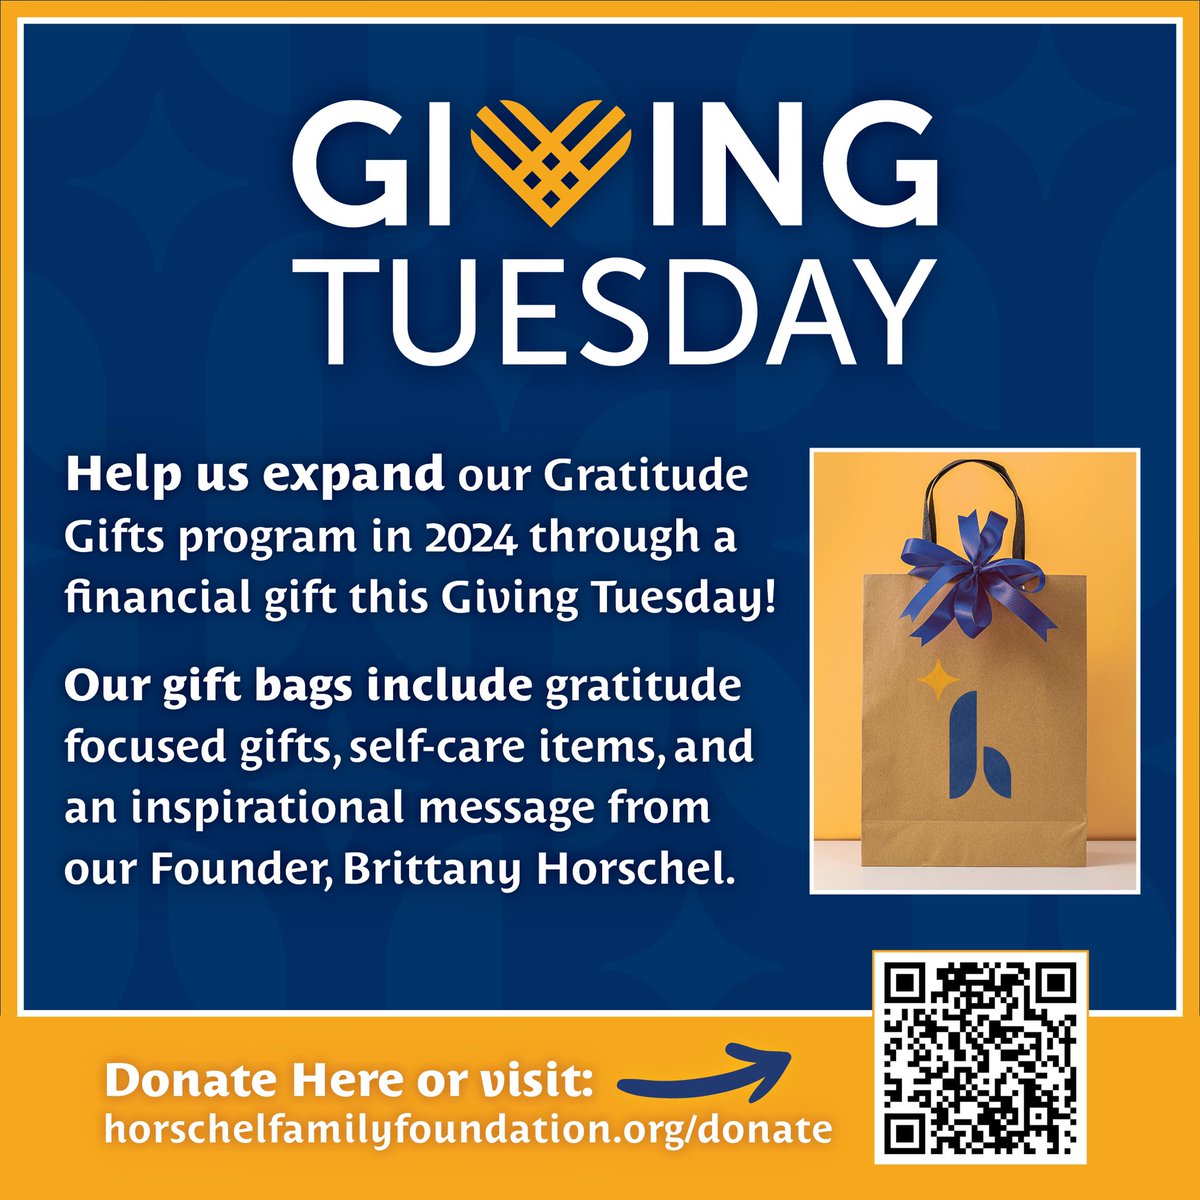 We invite YOU this #GivingTuesday to contribute to our Gratitude Gifts program. In 2024, we hope to expand our program to impact women all over Jacksonville. Thank you for your support! #gratitude @BillyHo_Golf @britthorschel